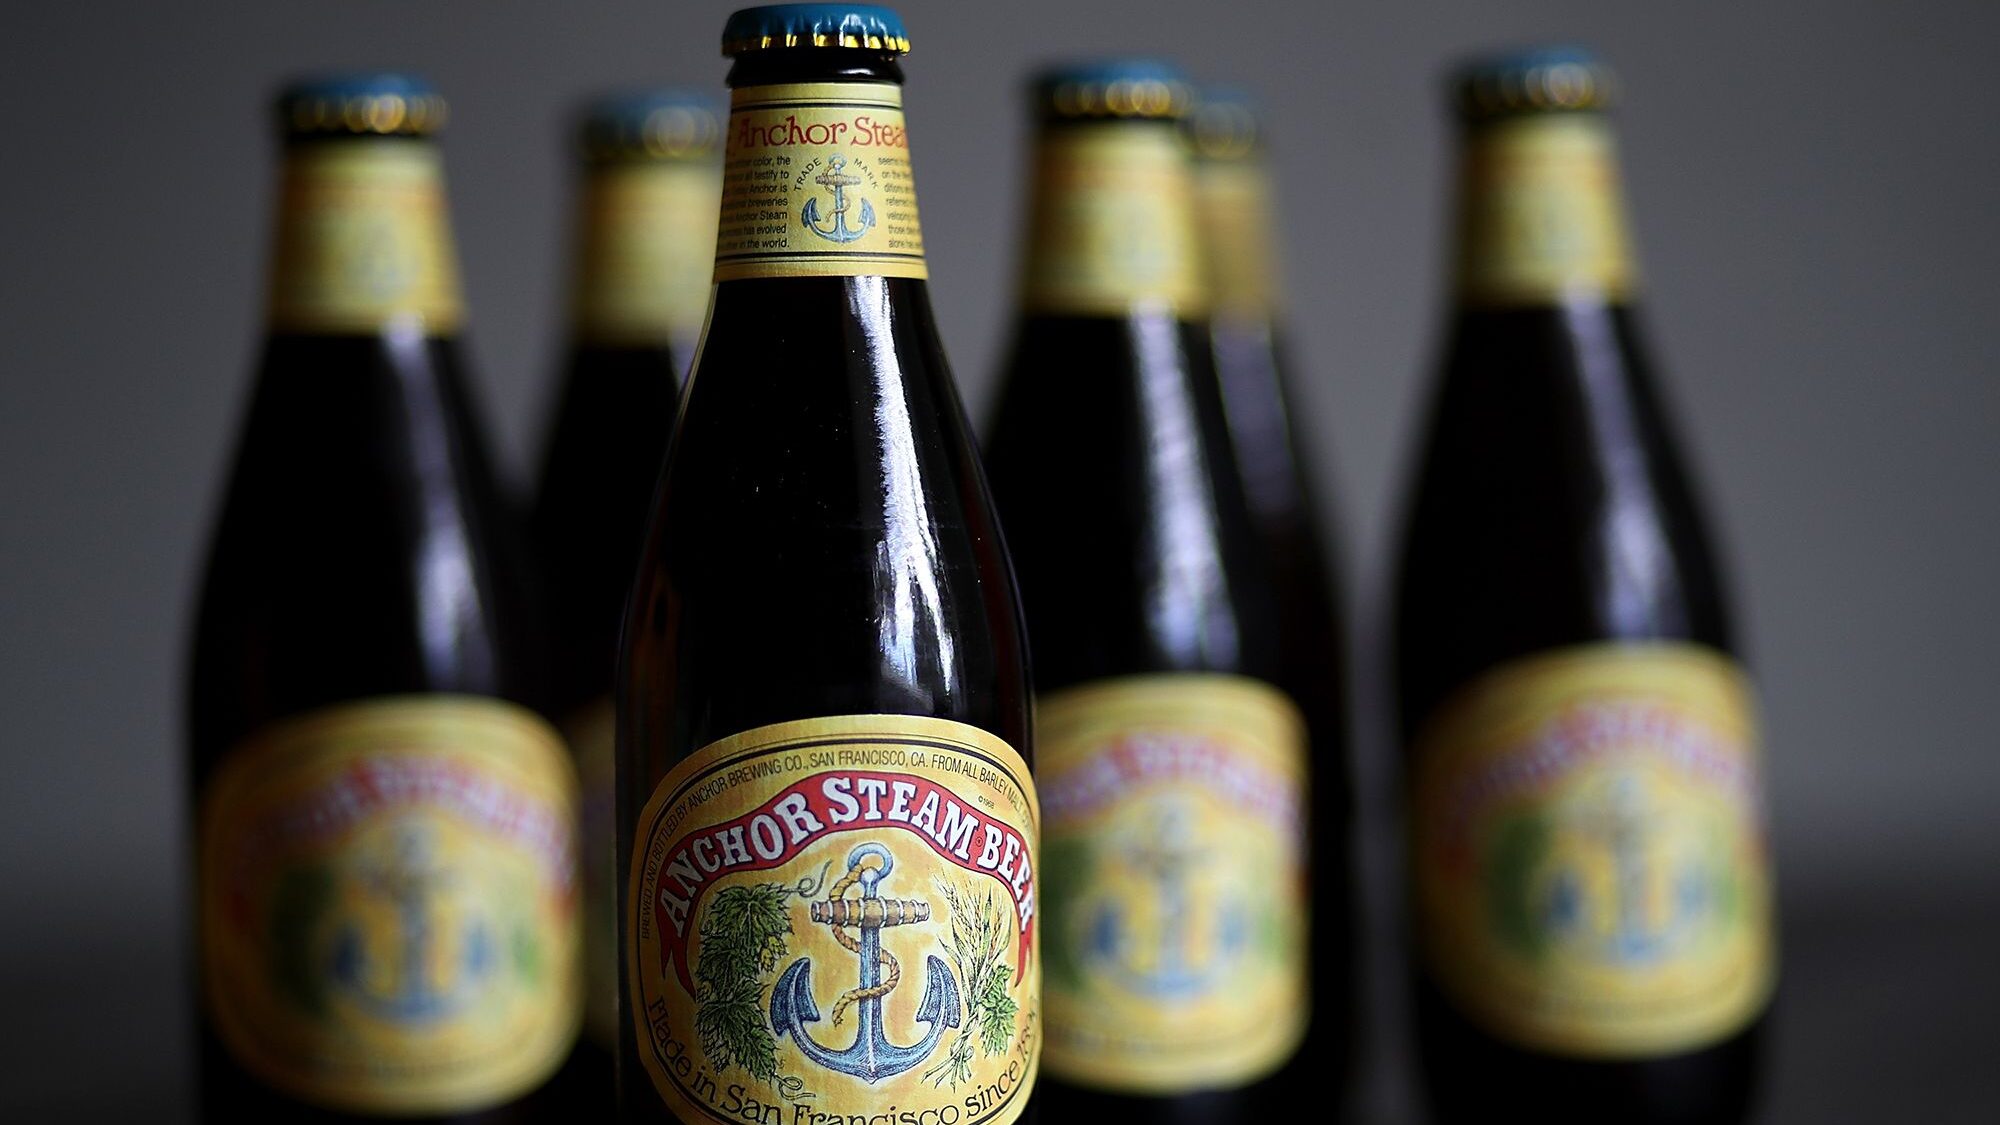 Bottles of Anchor Steam beer are displayed on August 3, 2017 in San Anselmo, California. Photo cred...